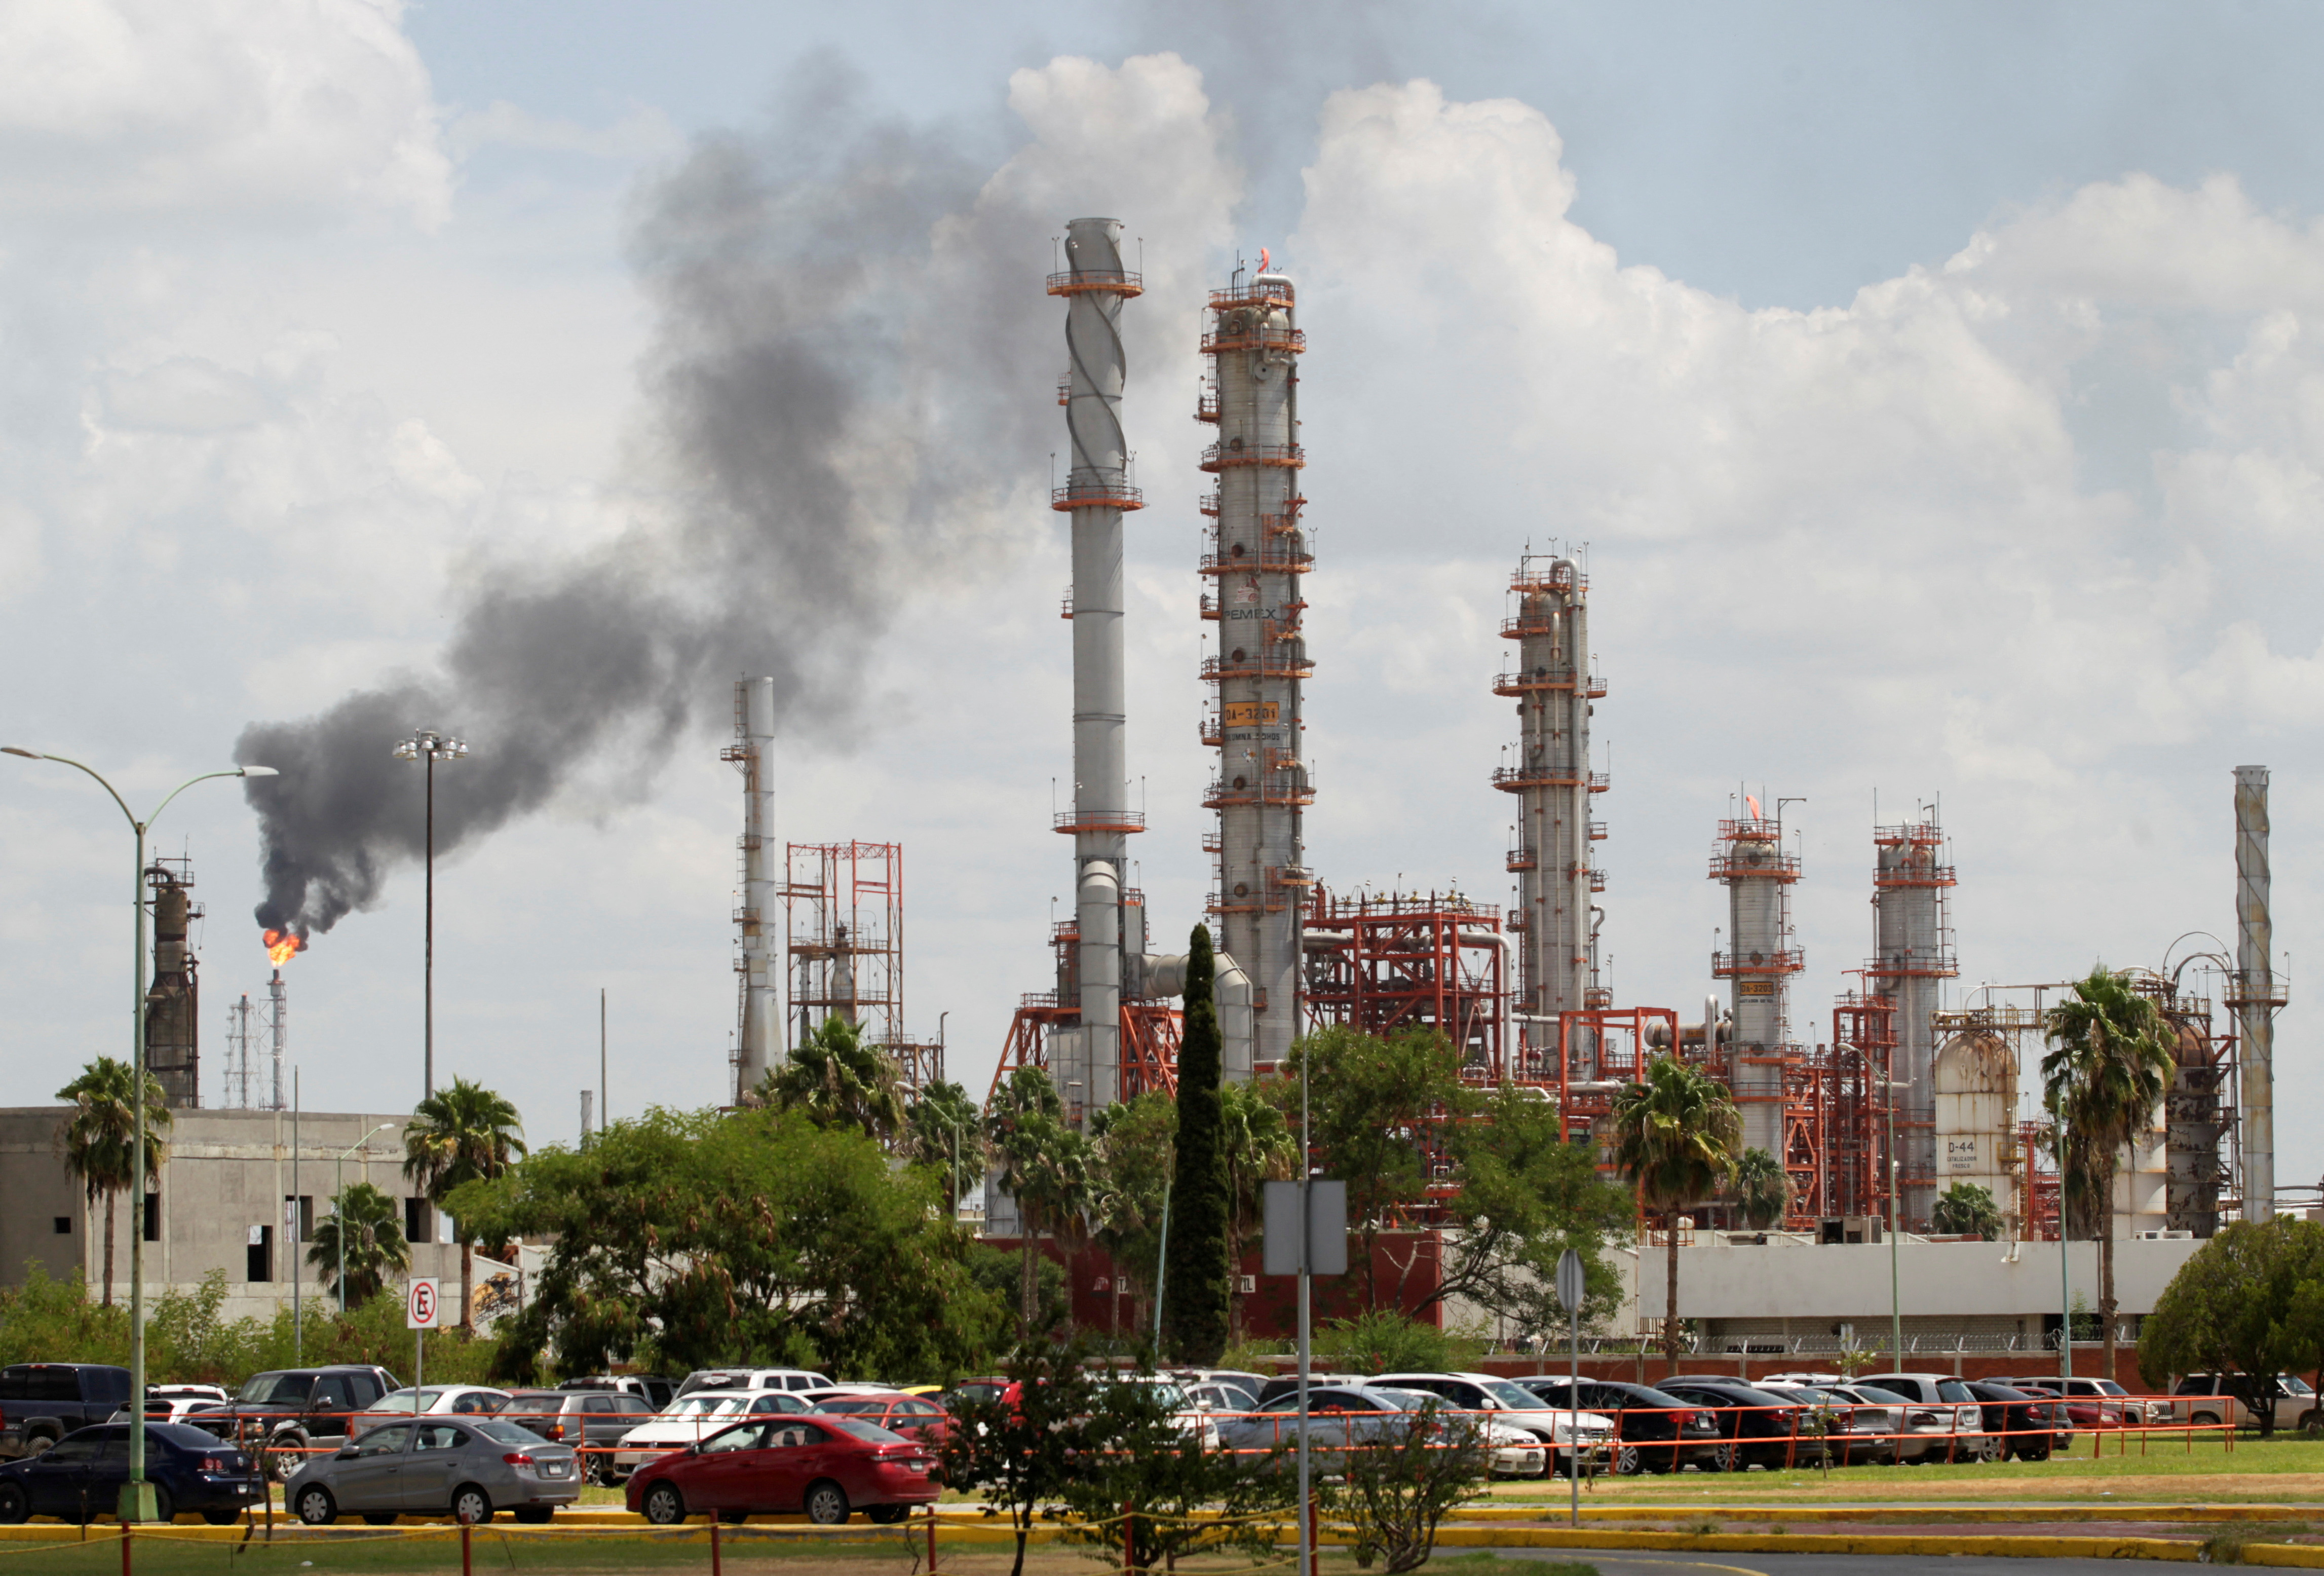 A general view shows Mexican state oil firm Pemex's Cadereyta refinery in Cadereyta